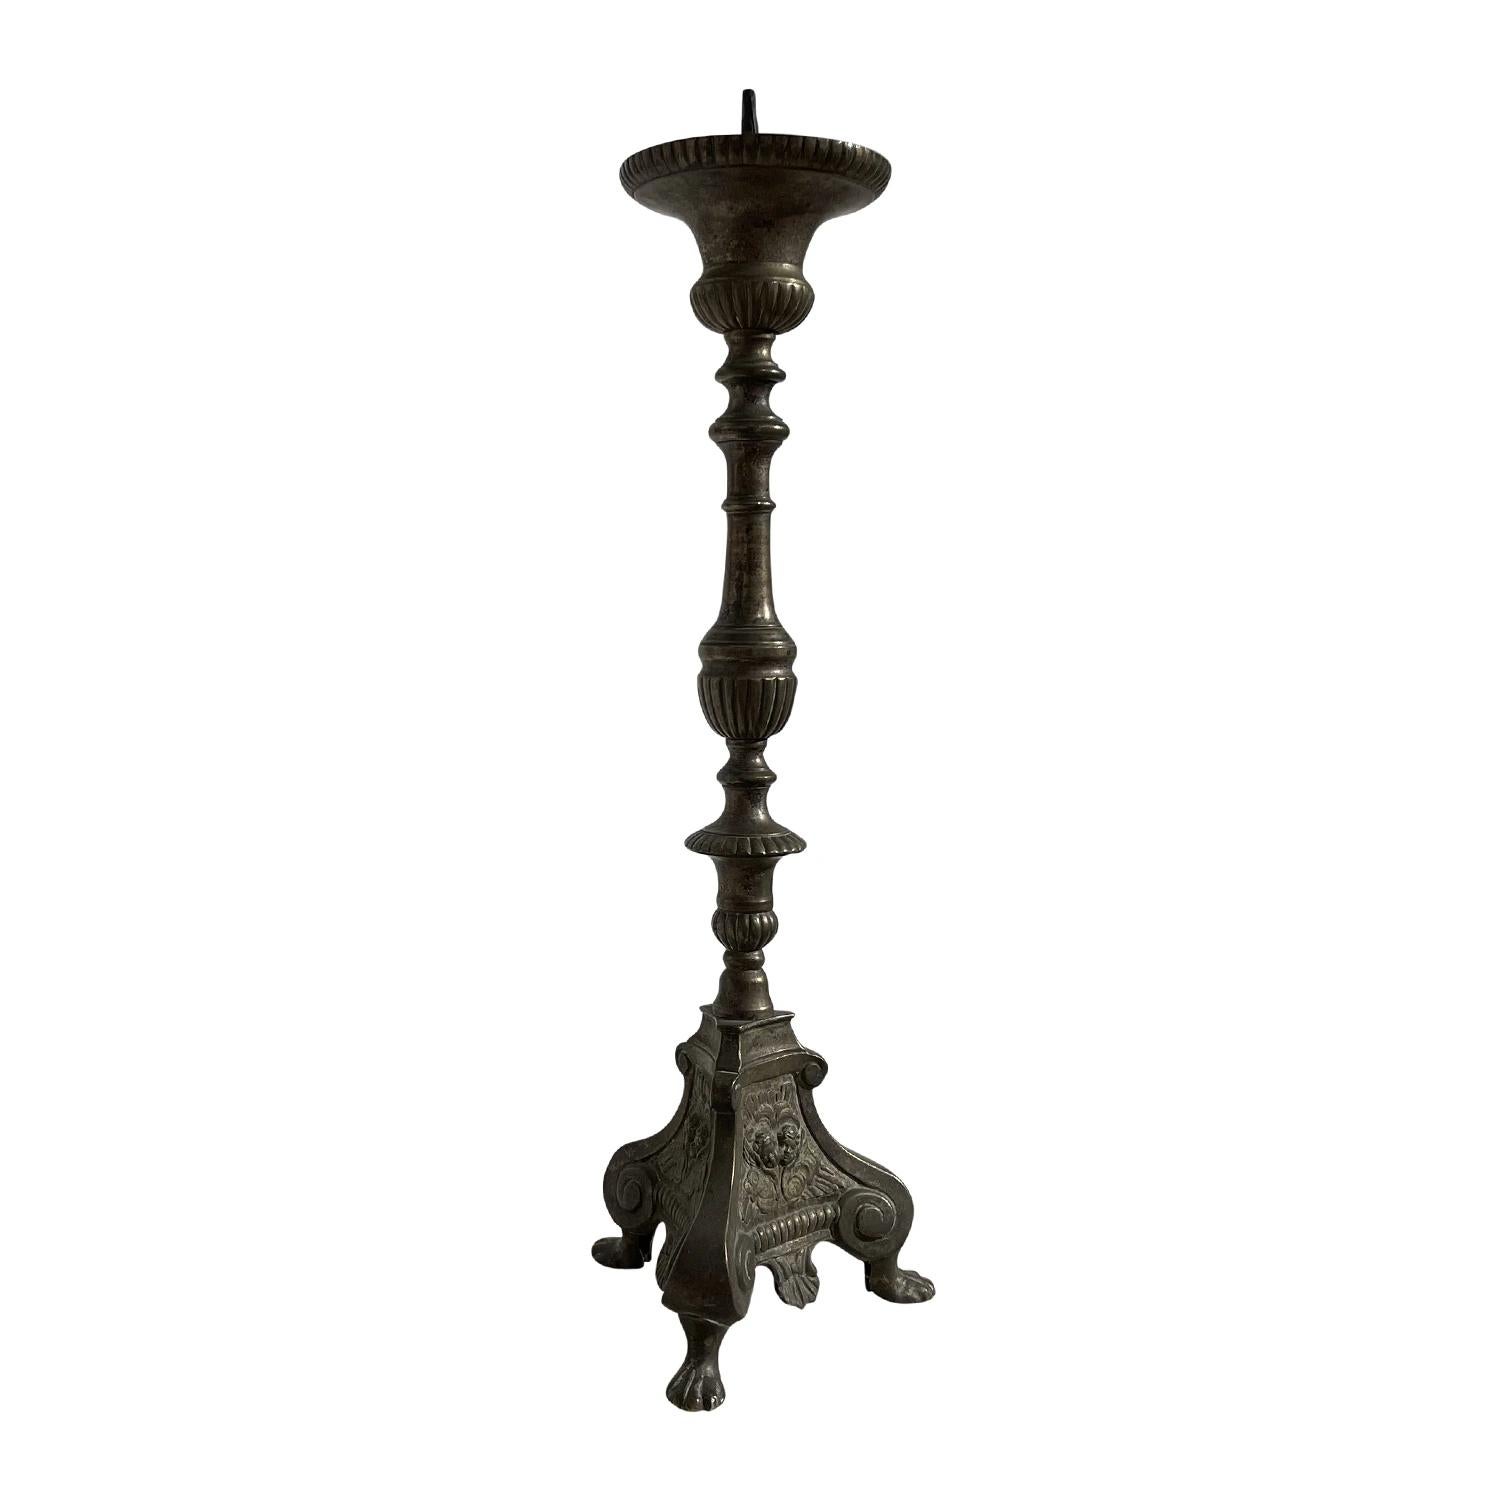 An antique Italian religious symbolism Altar candle holder made of hand crafted bronze, in good condition. The tall detailed crafted church candle holder is supported by a triangle base, standing on two arched feet. Wear consistent with age and use.